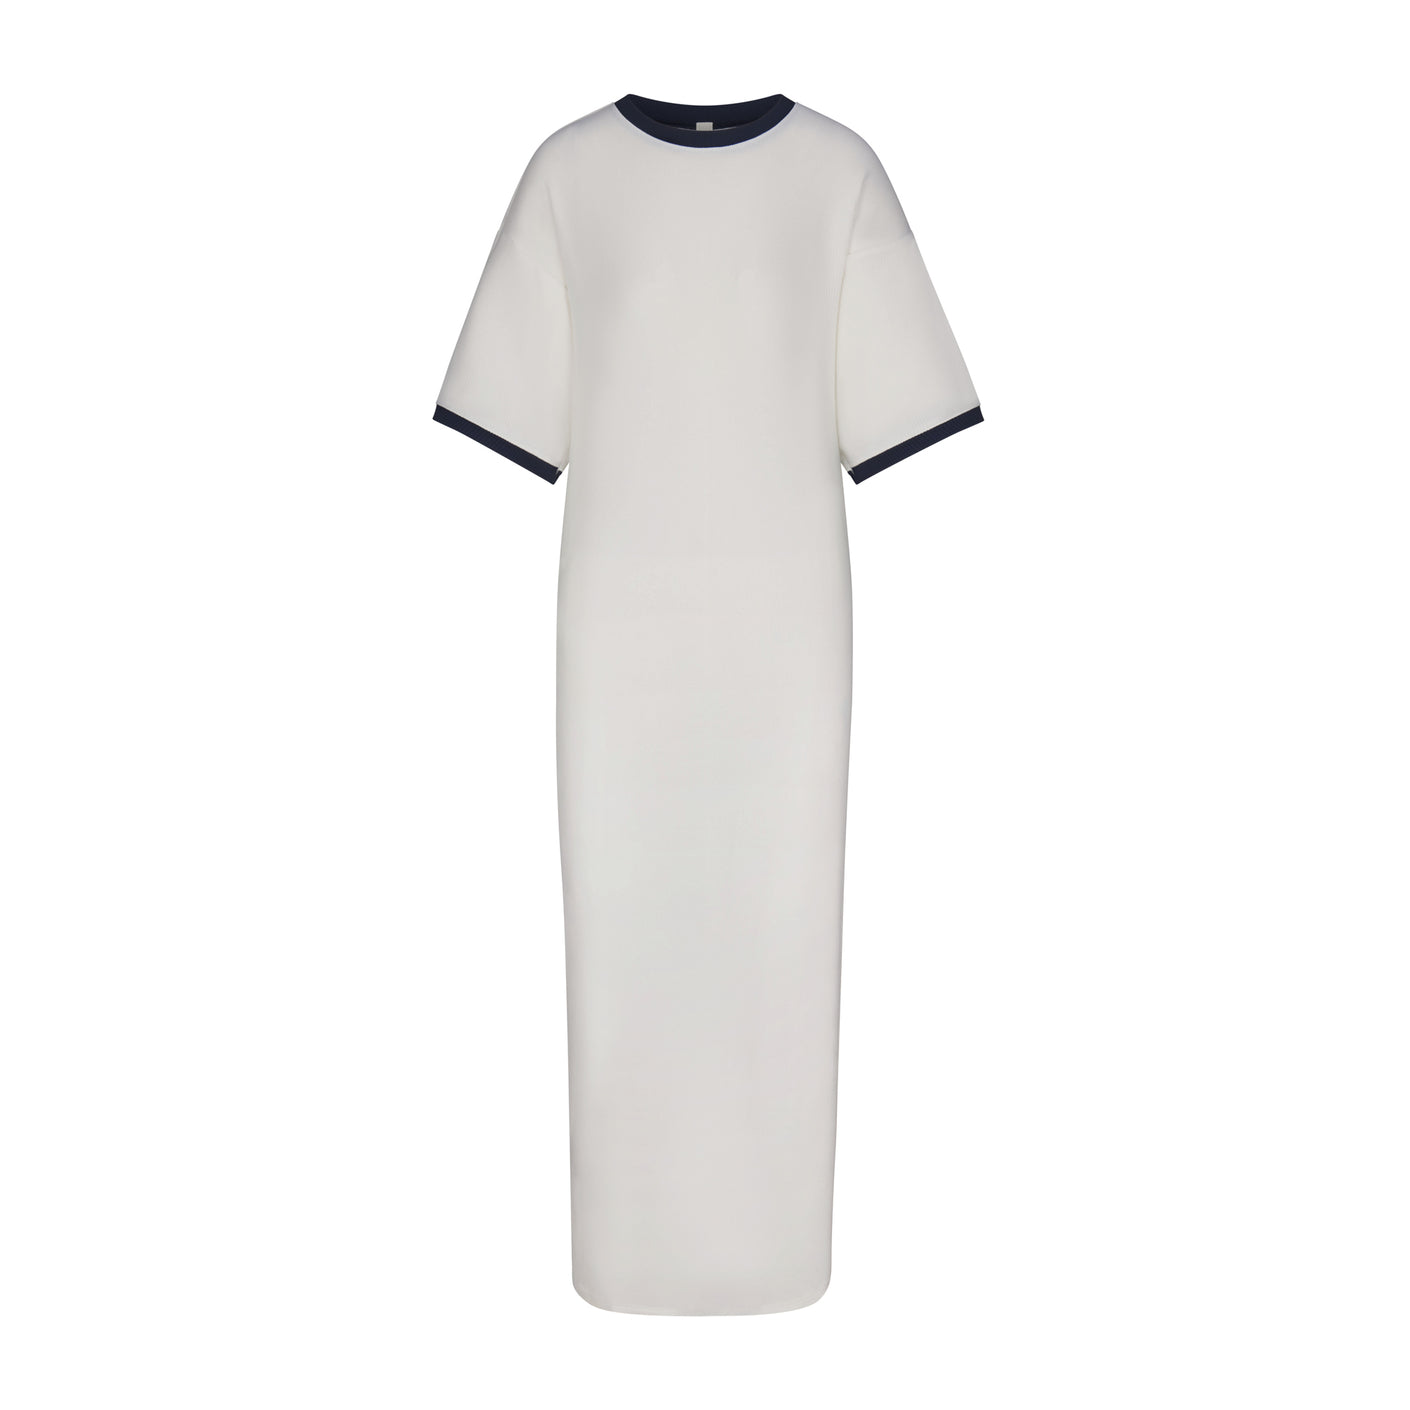 What do we think of these new T-shirt Ringer Long dress from @SKIMS #